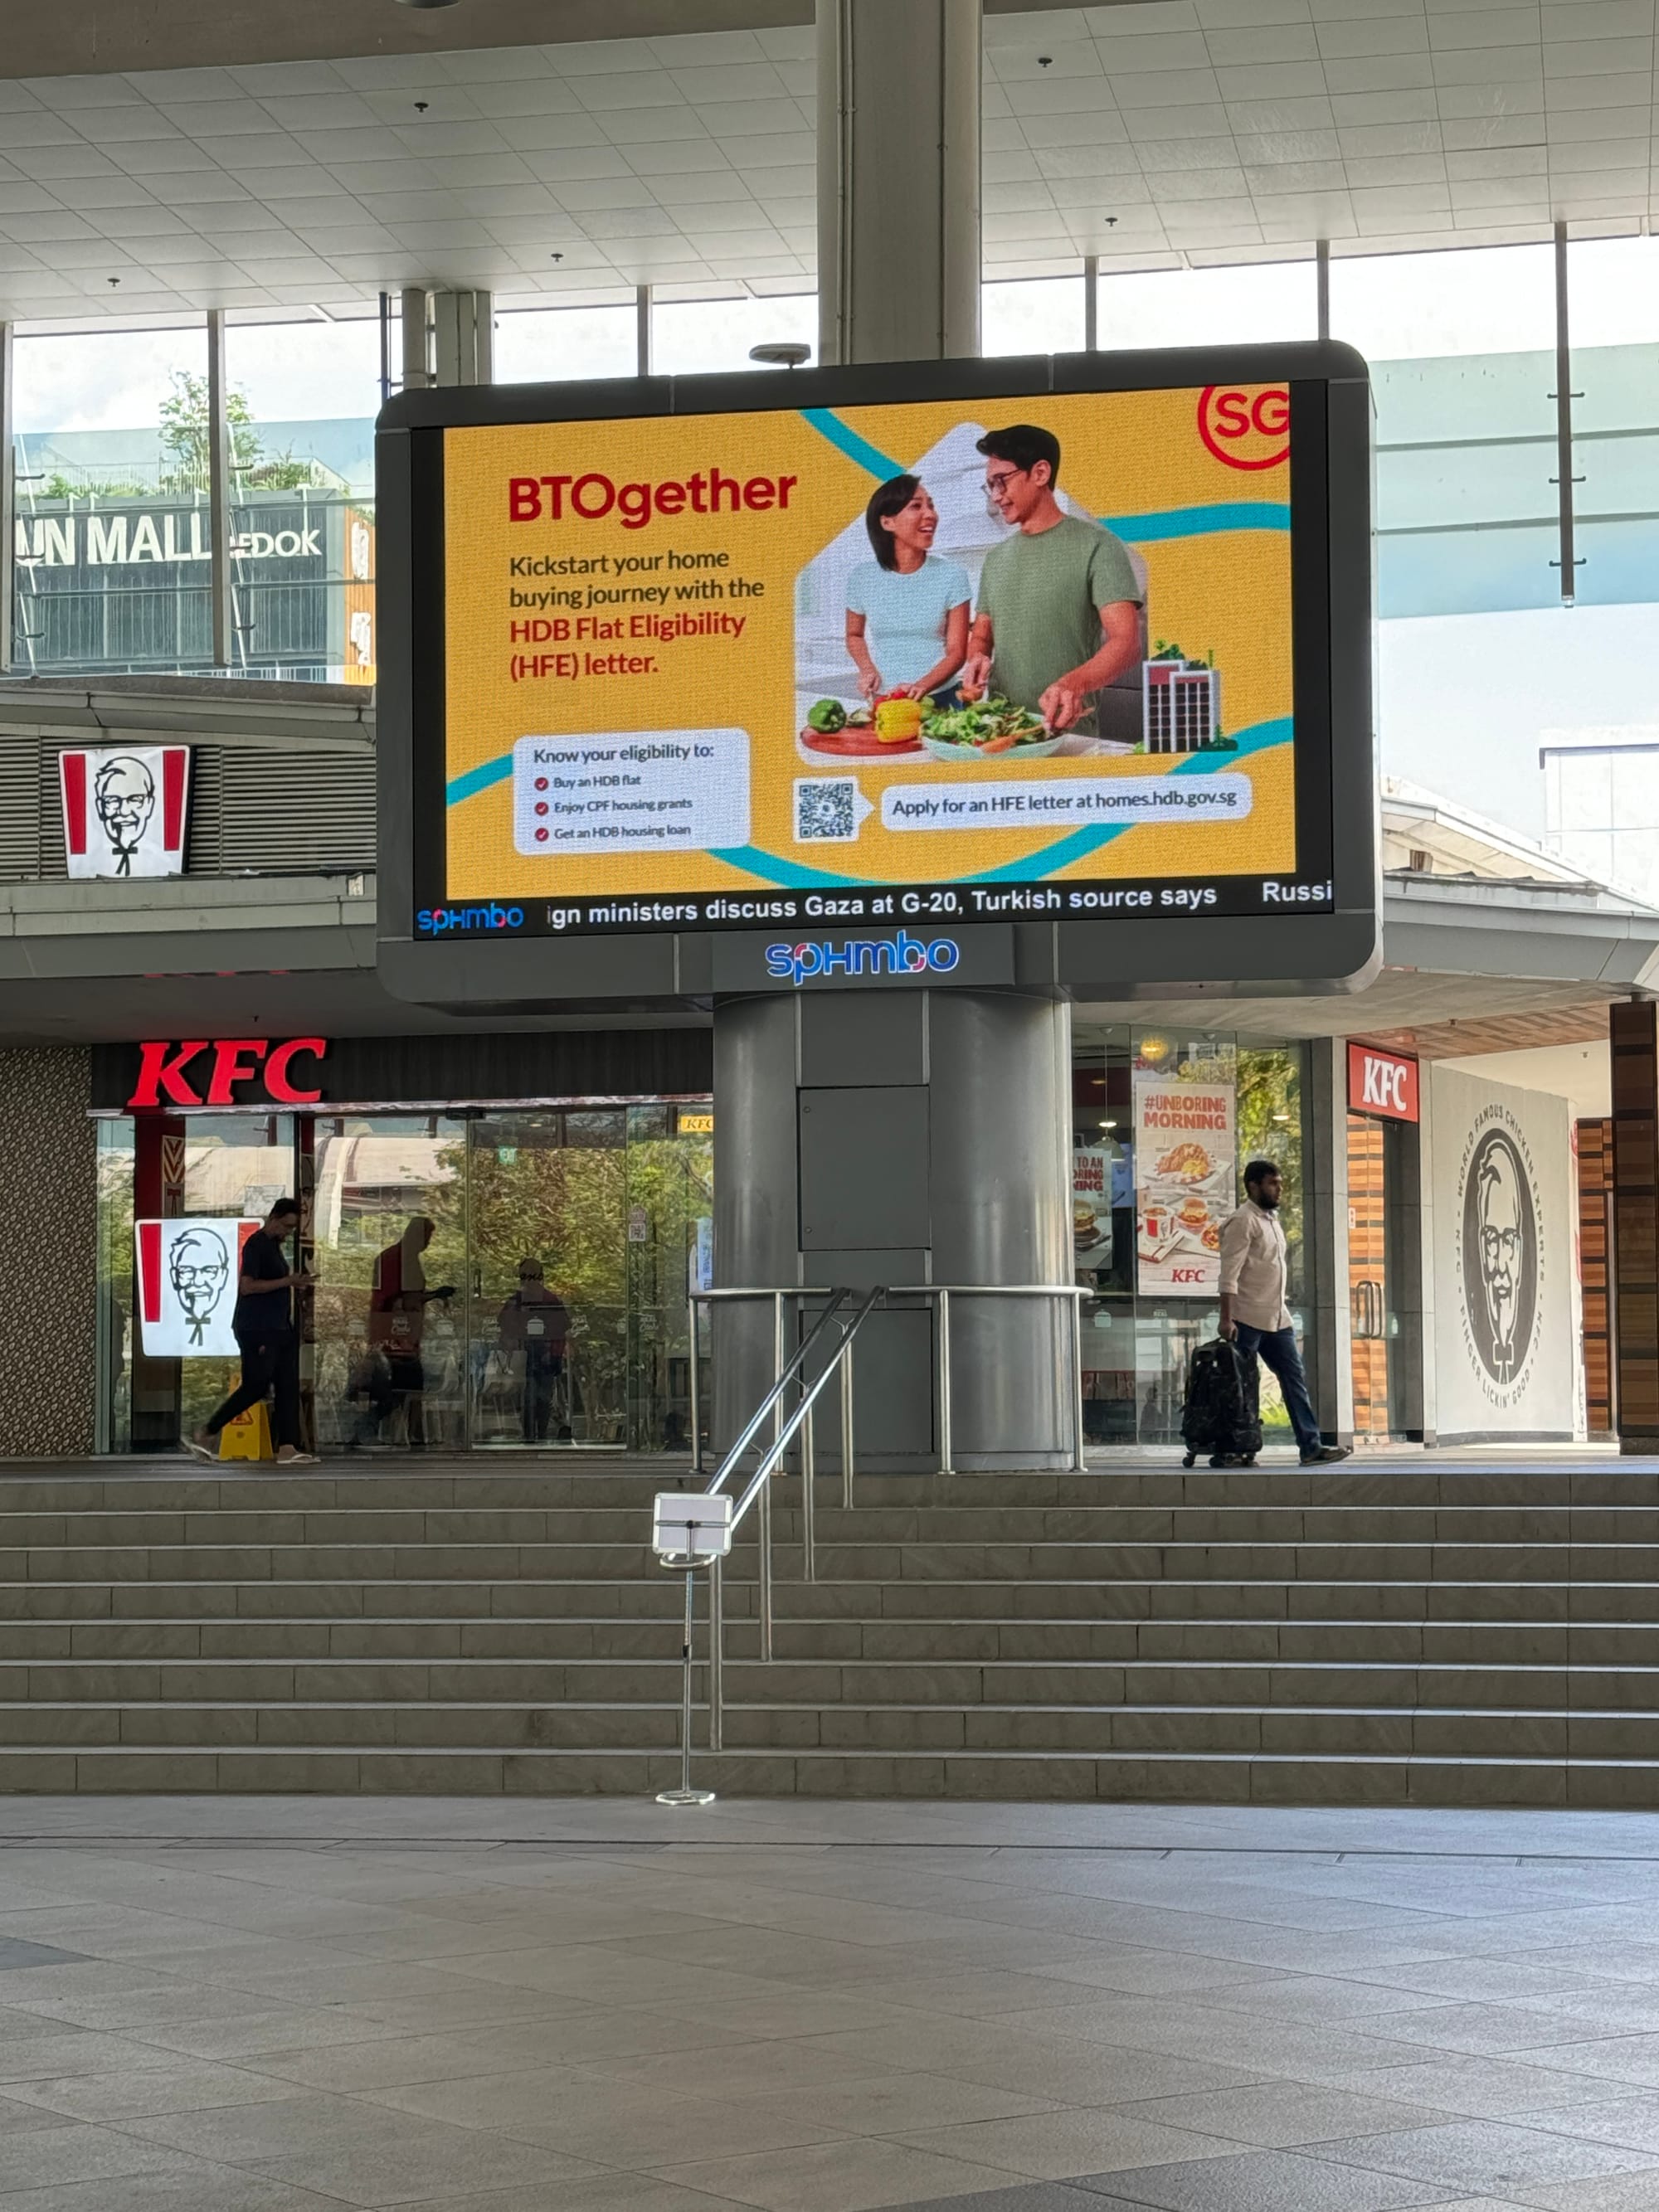 Image of billboard in a Singapore neighbourhood with the message "BTOgether: Kickstart your home buying journey with the HDB Flat Eligibility (HFE) Letter."